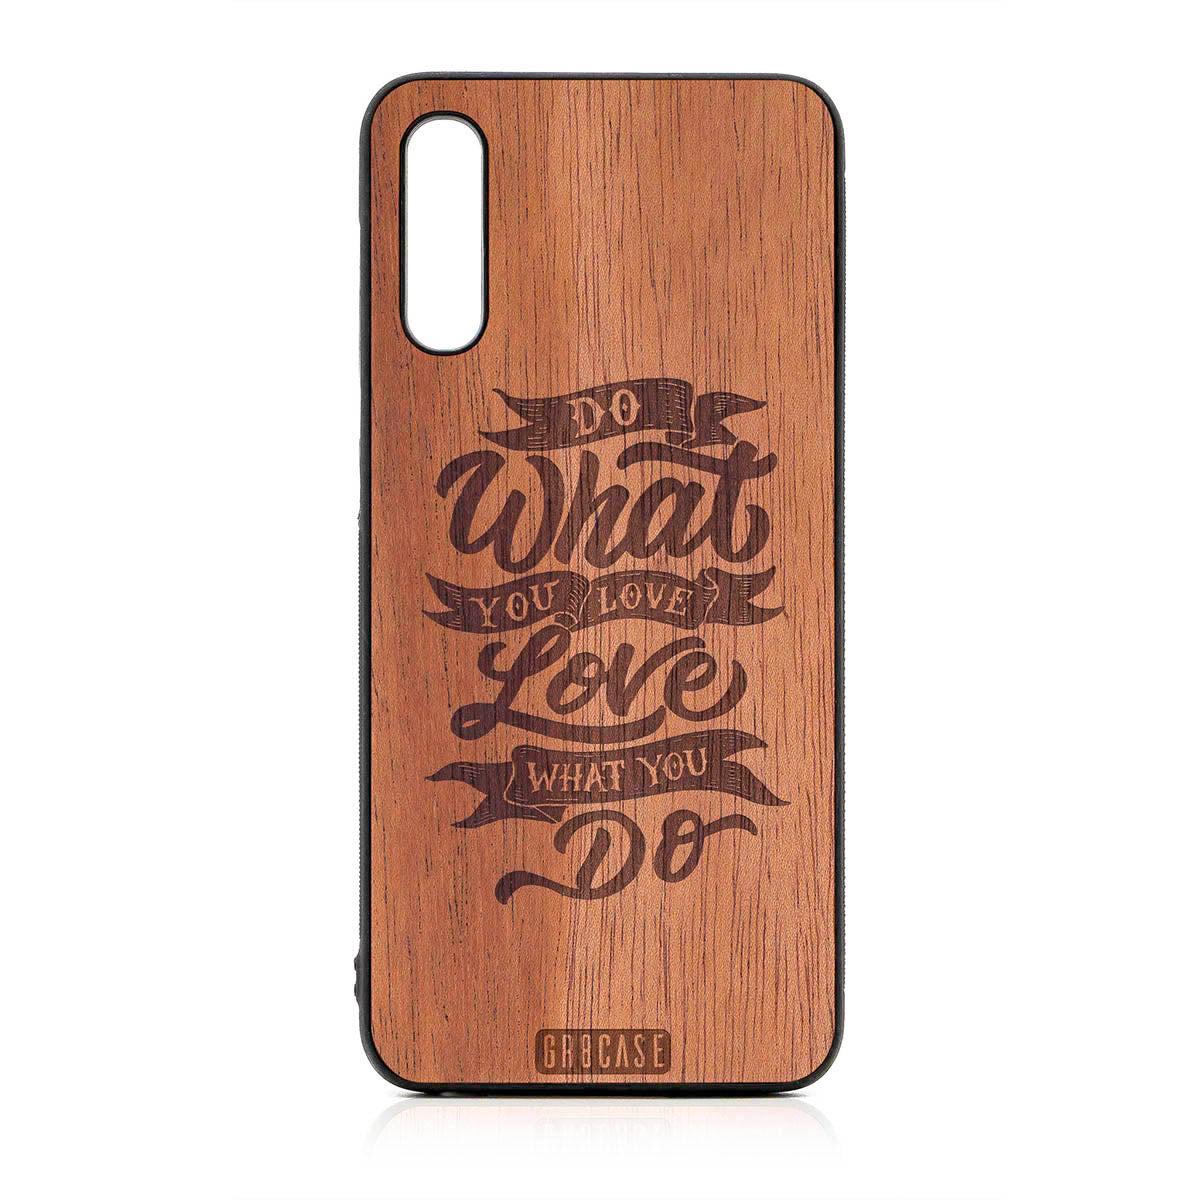 Do What You Love Love What You Do Design Wood Case For Samsung Galaxy A50 by GR8CASE